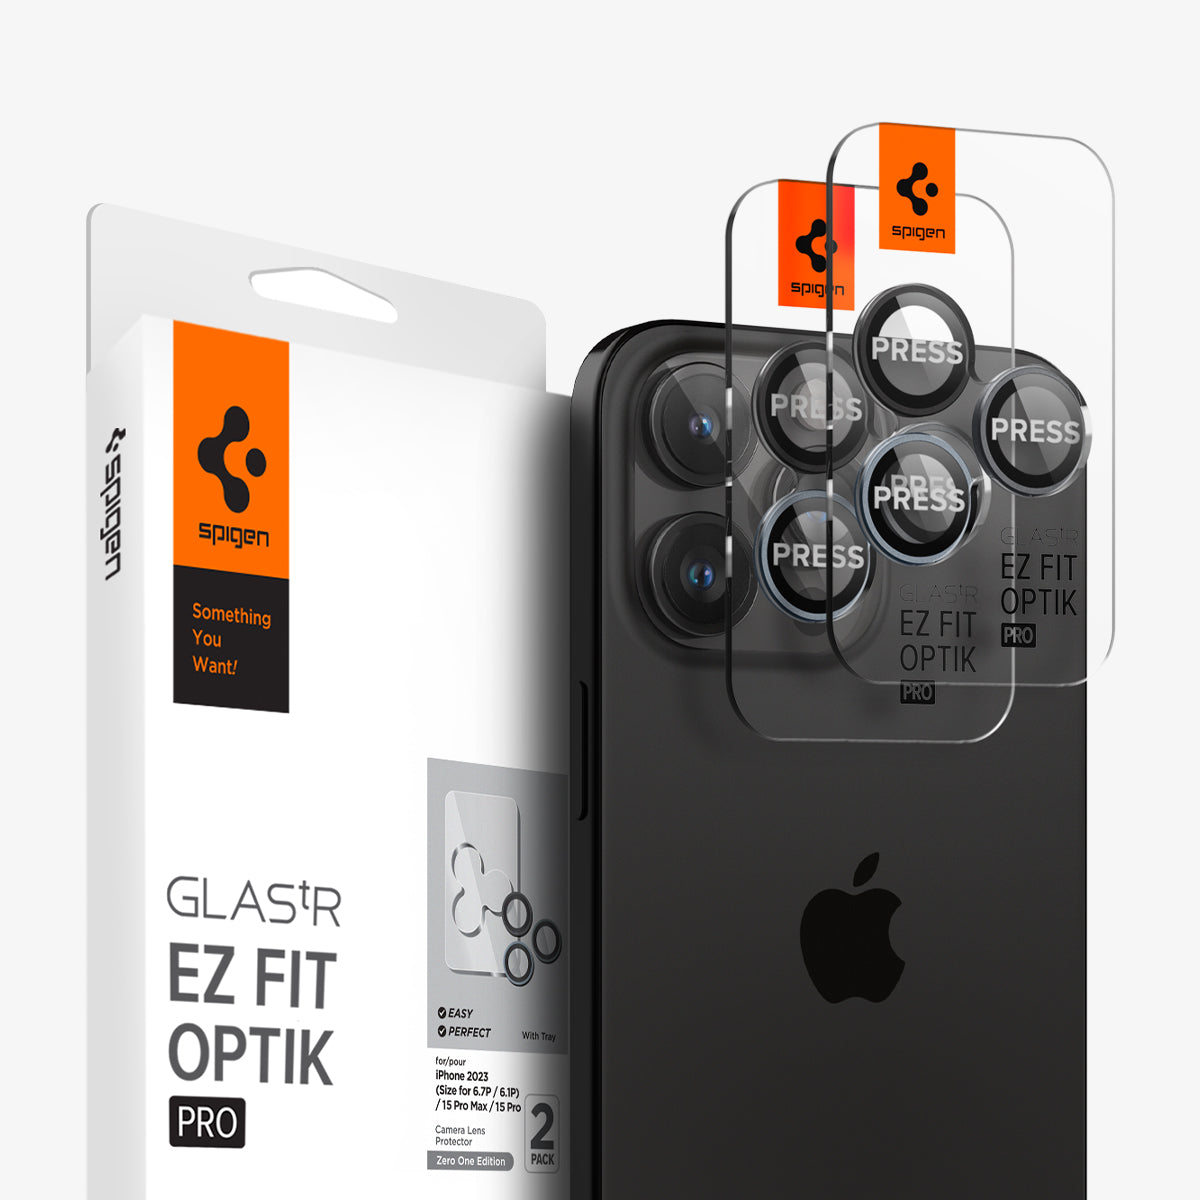 AGL06159 - iPhone 15 Pro / 15 Pro Max Optik Pro Lens Protector in zero one showing the device, two lens protectors and packaging